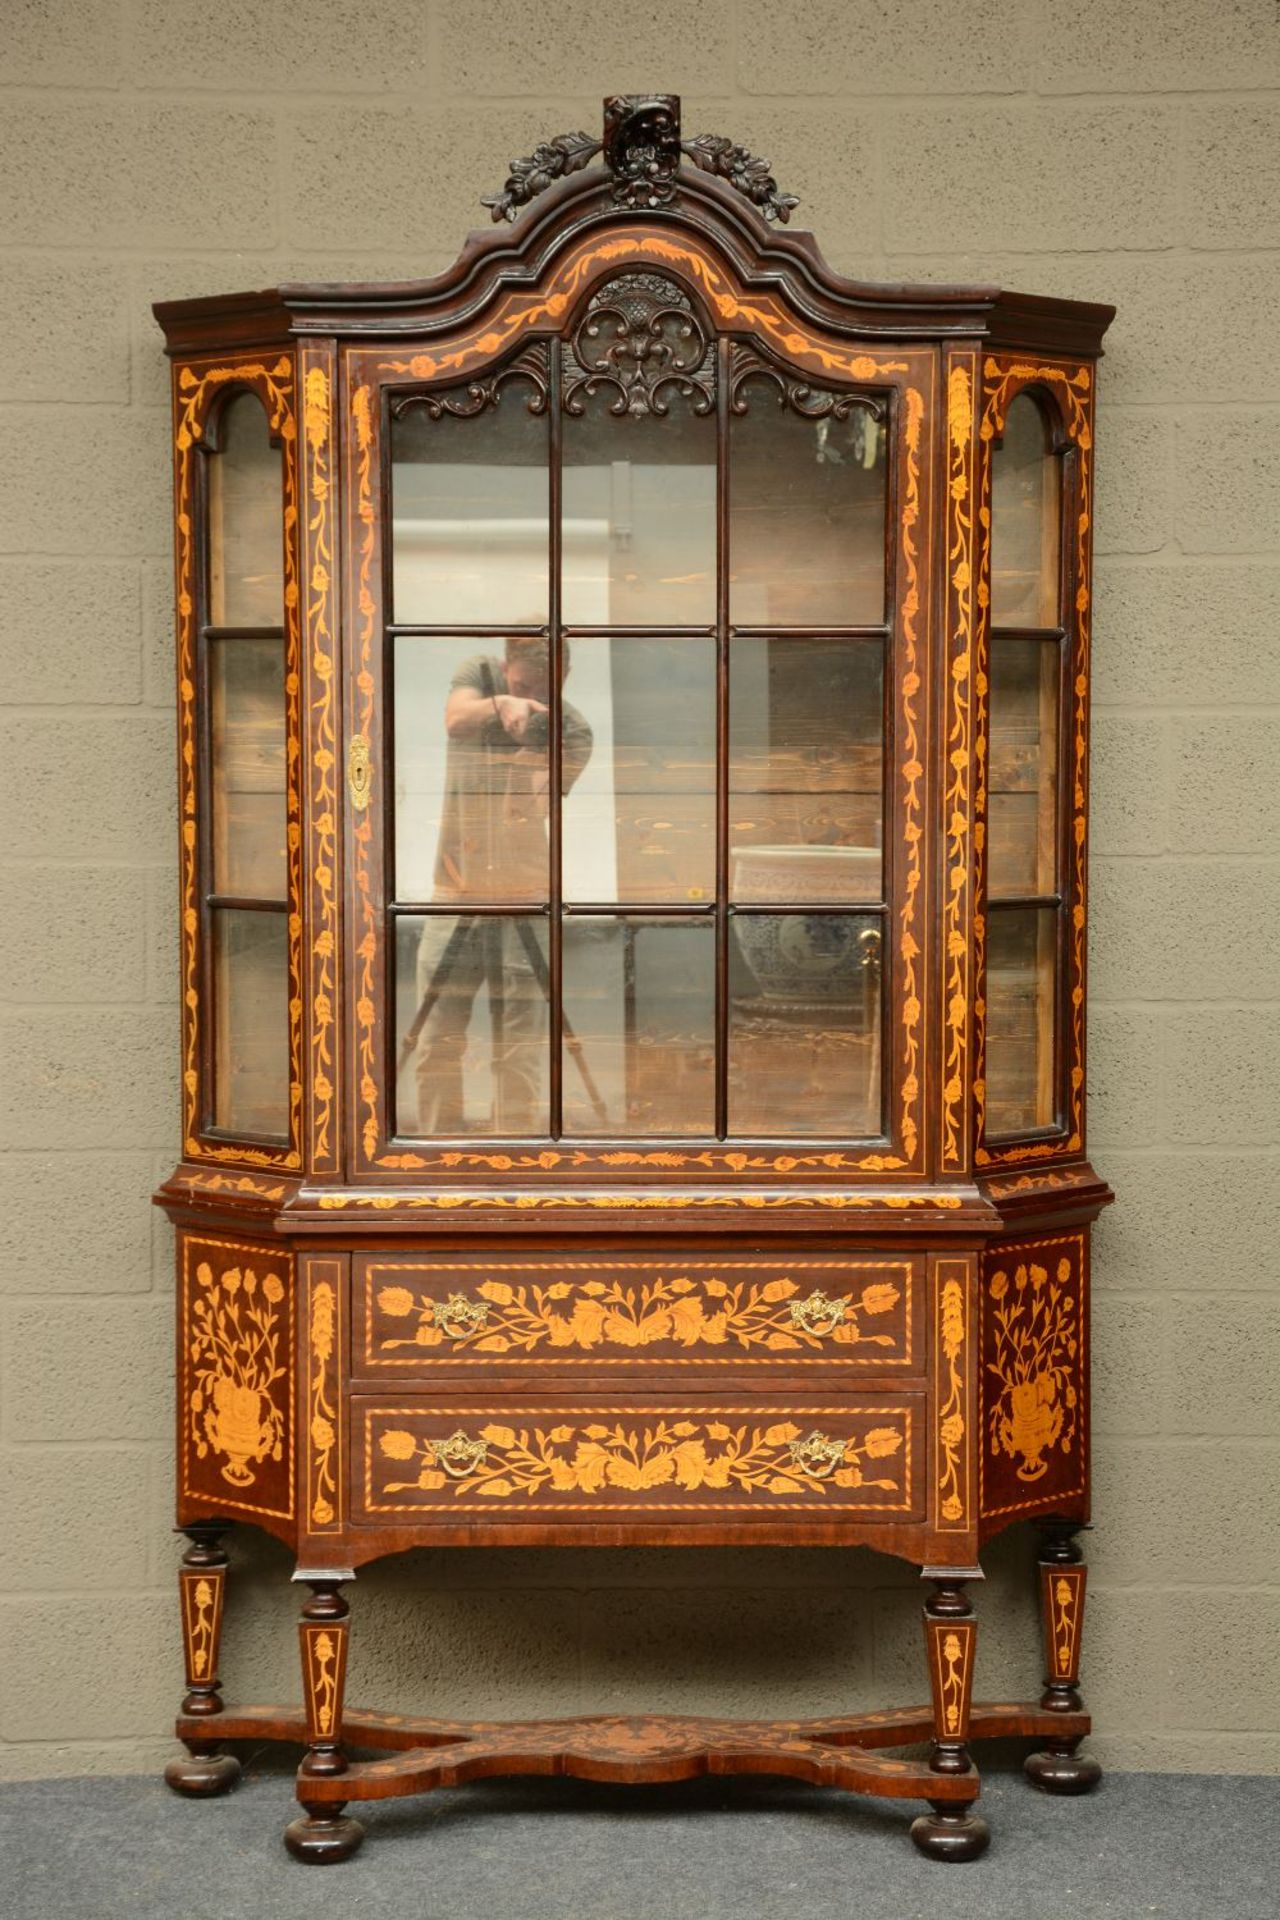 A Dutch rosewood and floral marquetry veneered china display cabinet, H 219,5 - W 125 - D 43 cm - Bild 2 aus 7